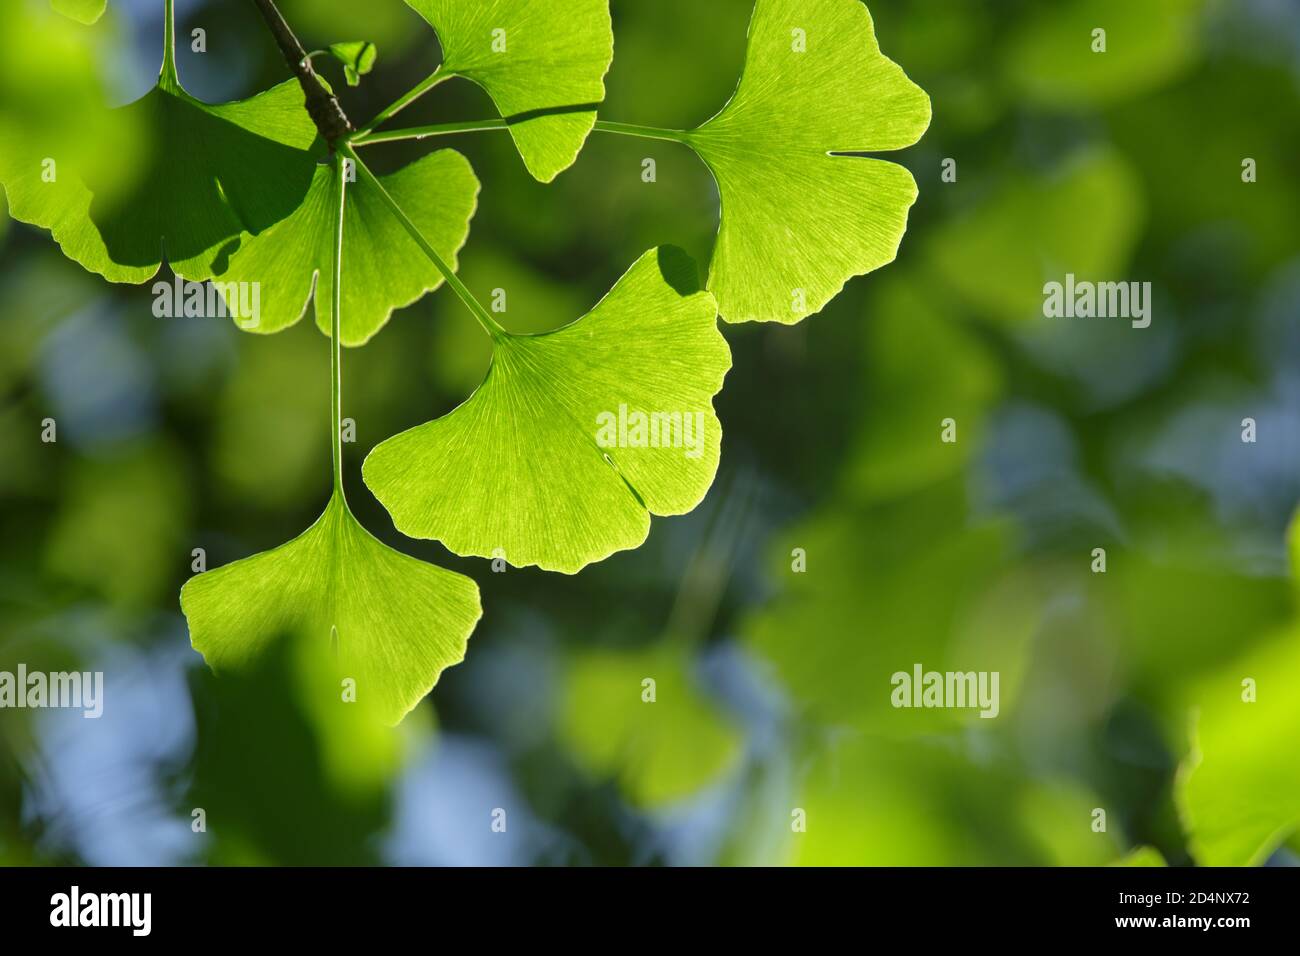 Ginkgo biloba tree. Close-up: green young leaves in bright lighting with a blurry background and a blue sky Stock Photo